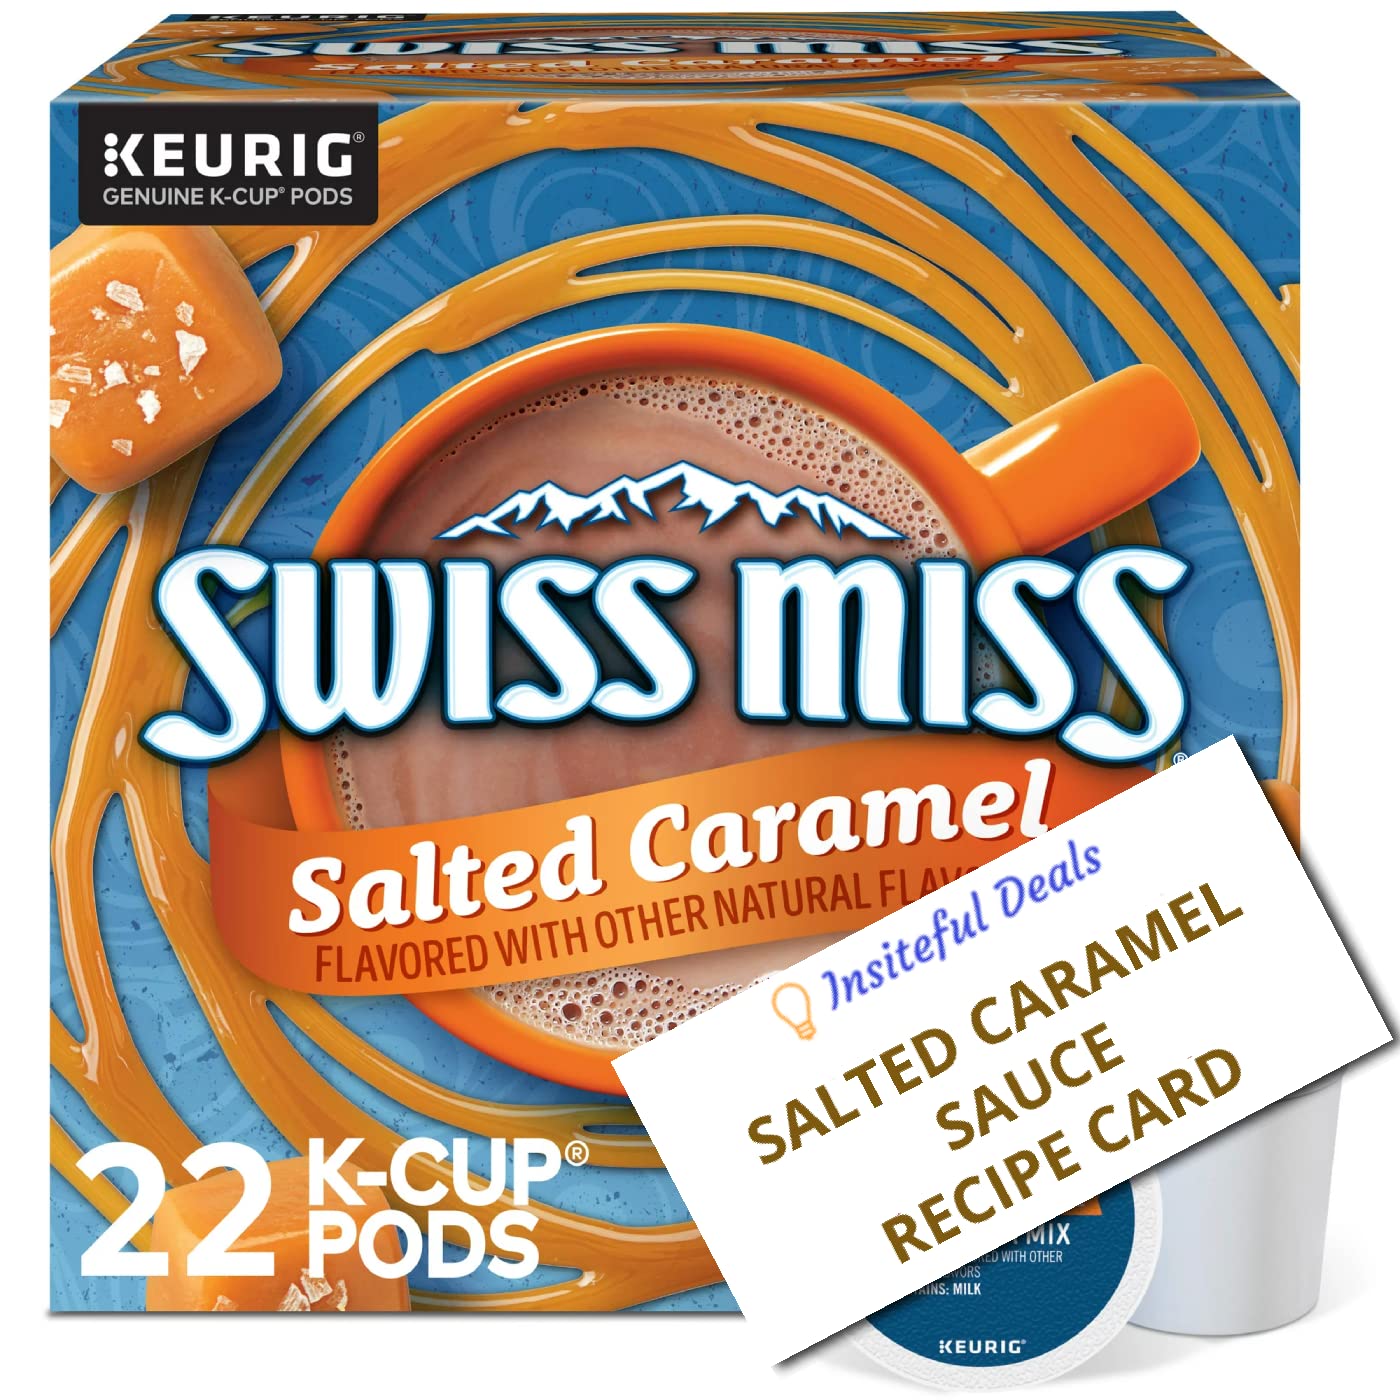 Swiss Miss Salted Caramel Hot Chocolate K Cups & Salted Caramel Sauce Recipe Card Bundle - Single-Serve Hot Cocoa KCups for Keurig Brewers - 1 box 22 Count (ct) Pods and Recipe Card Exclusively from Insiteful Deals